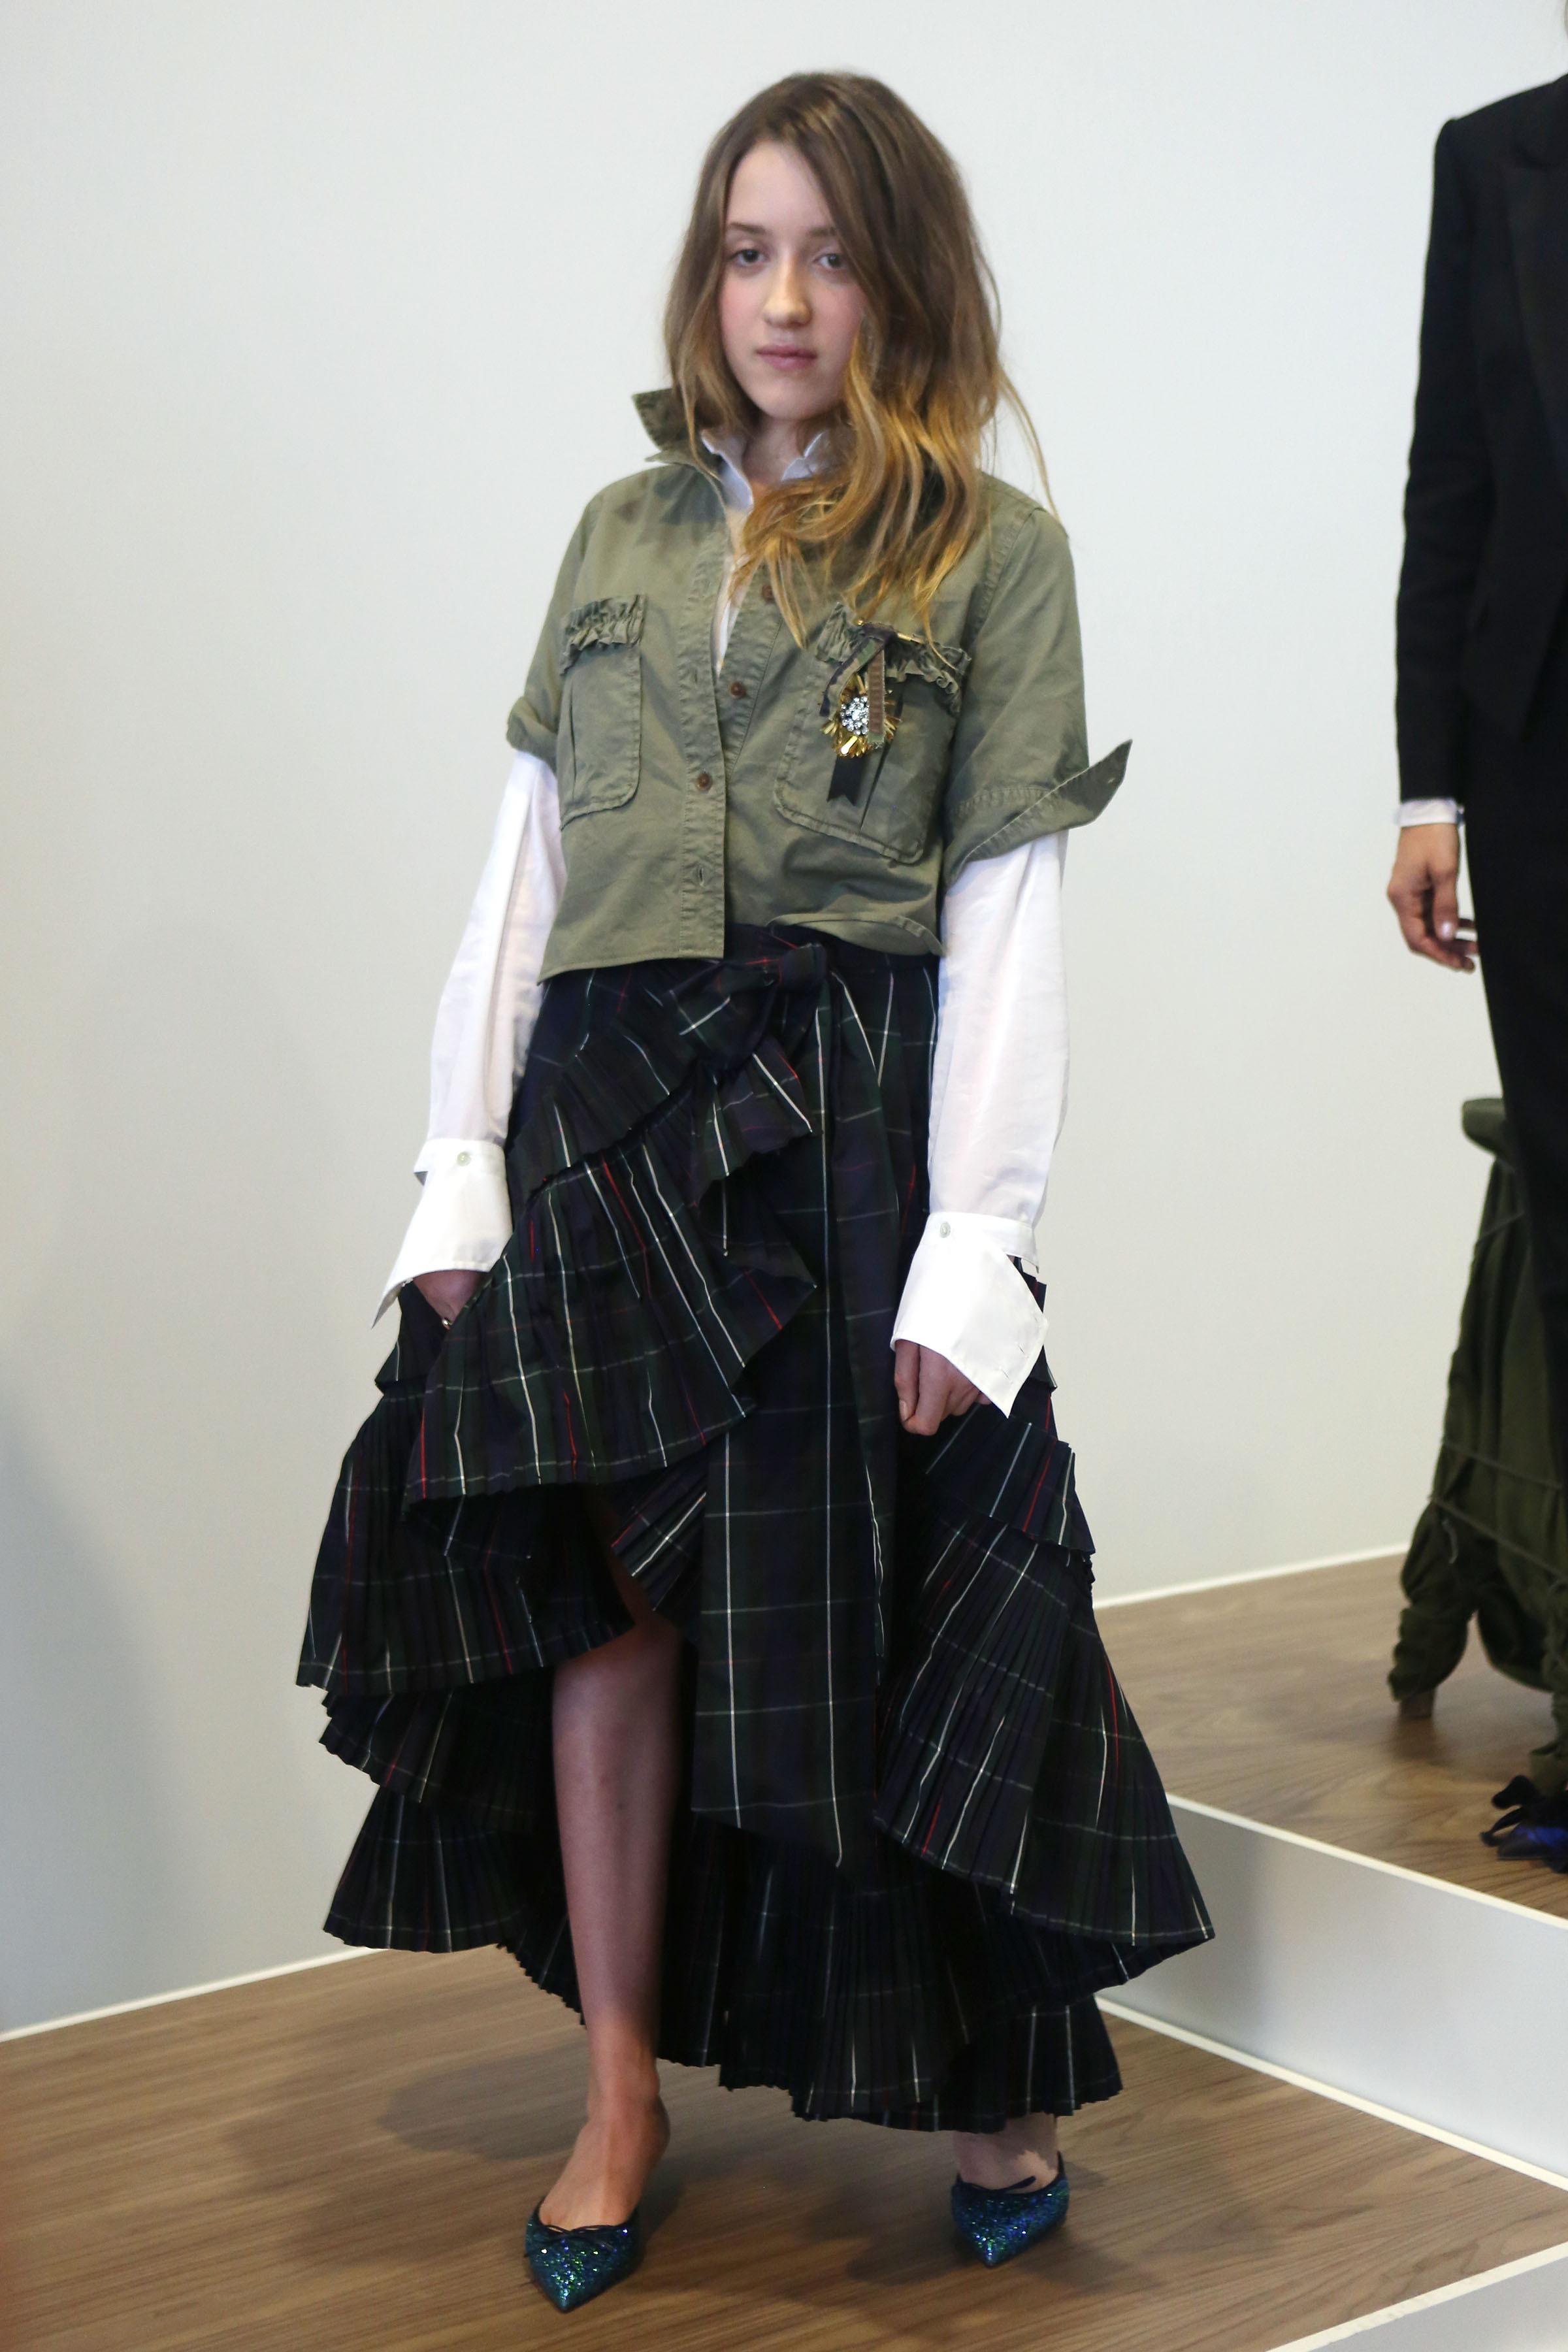 Mathilda Gianopoulos modeling at NYFW for J.Crew